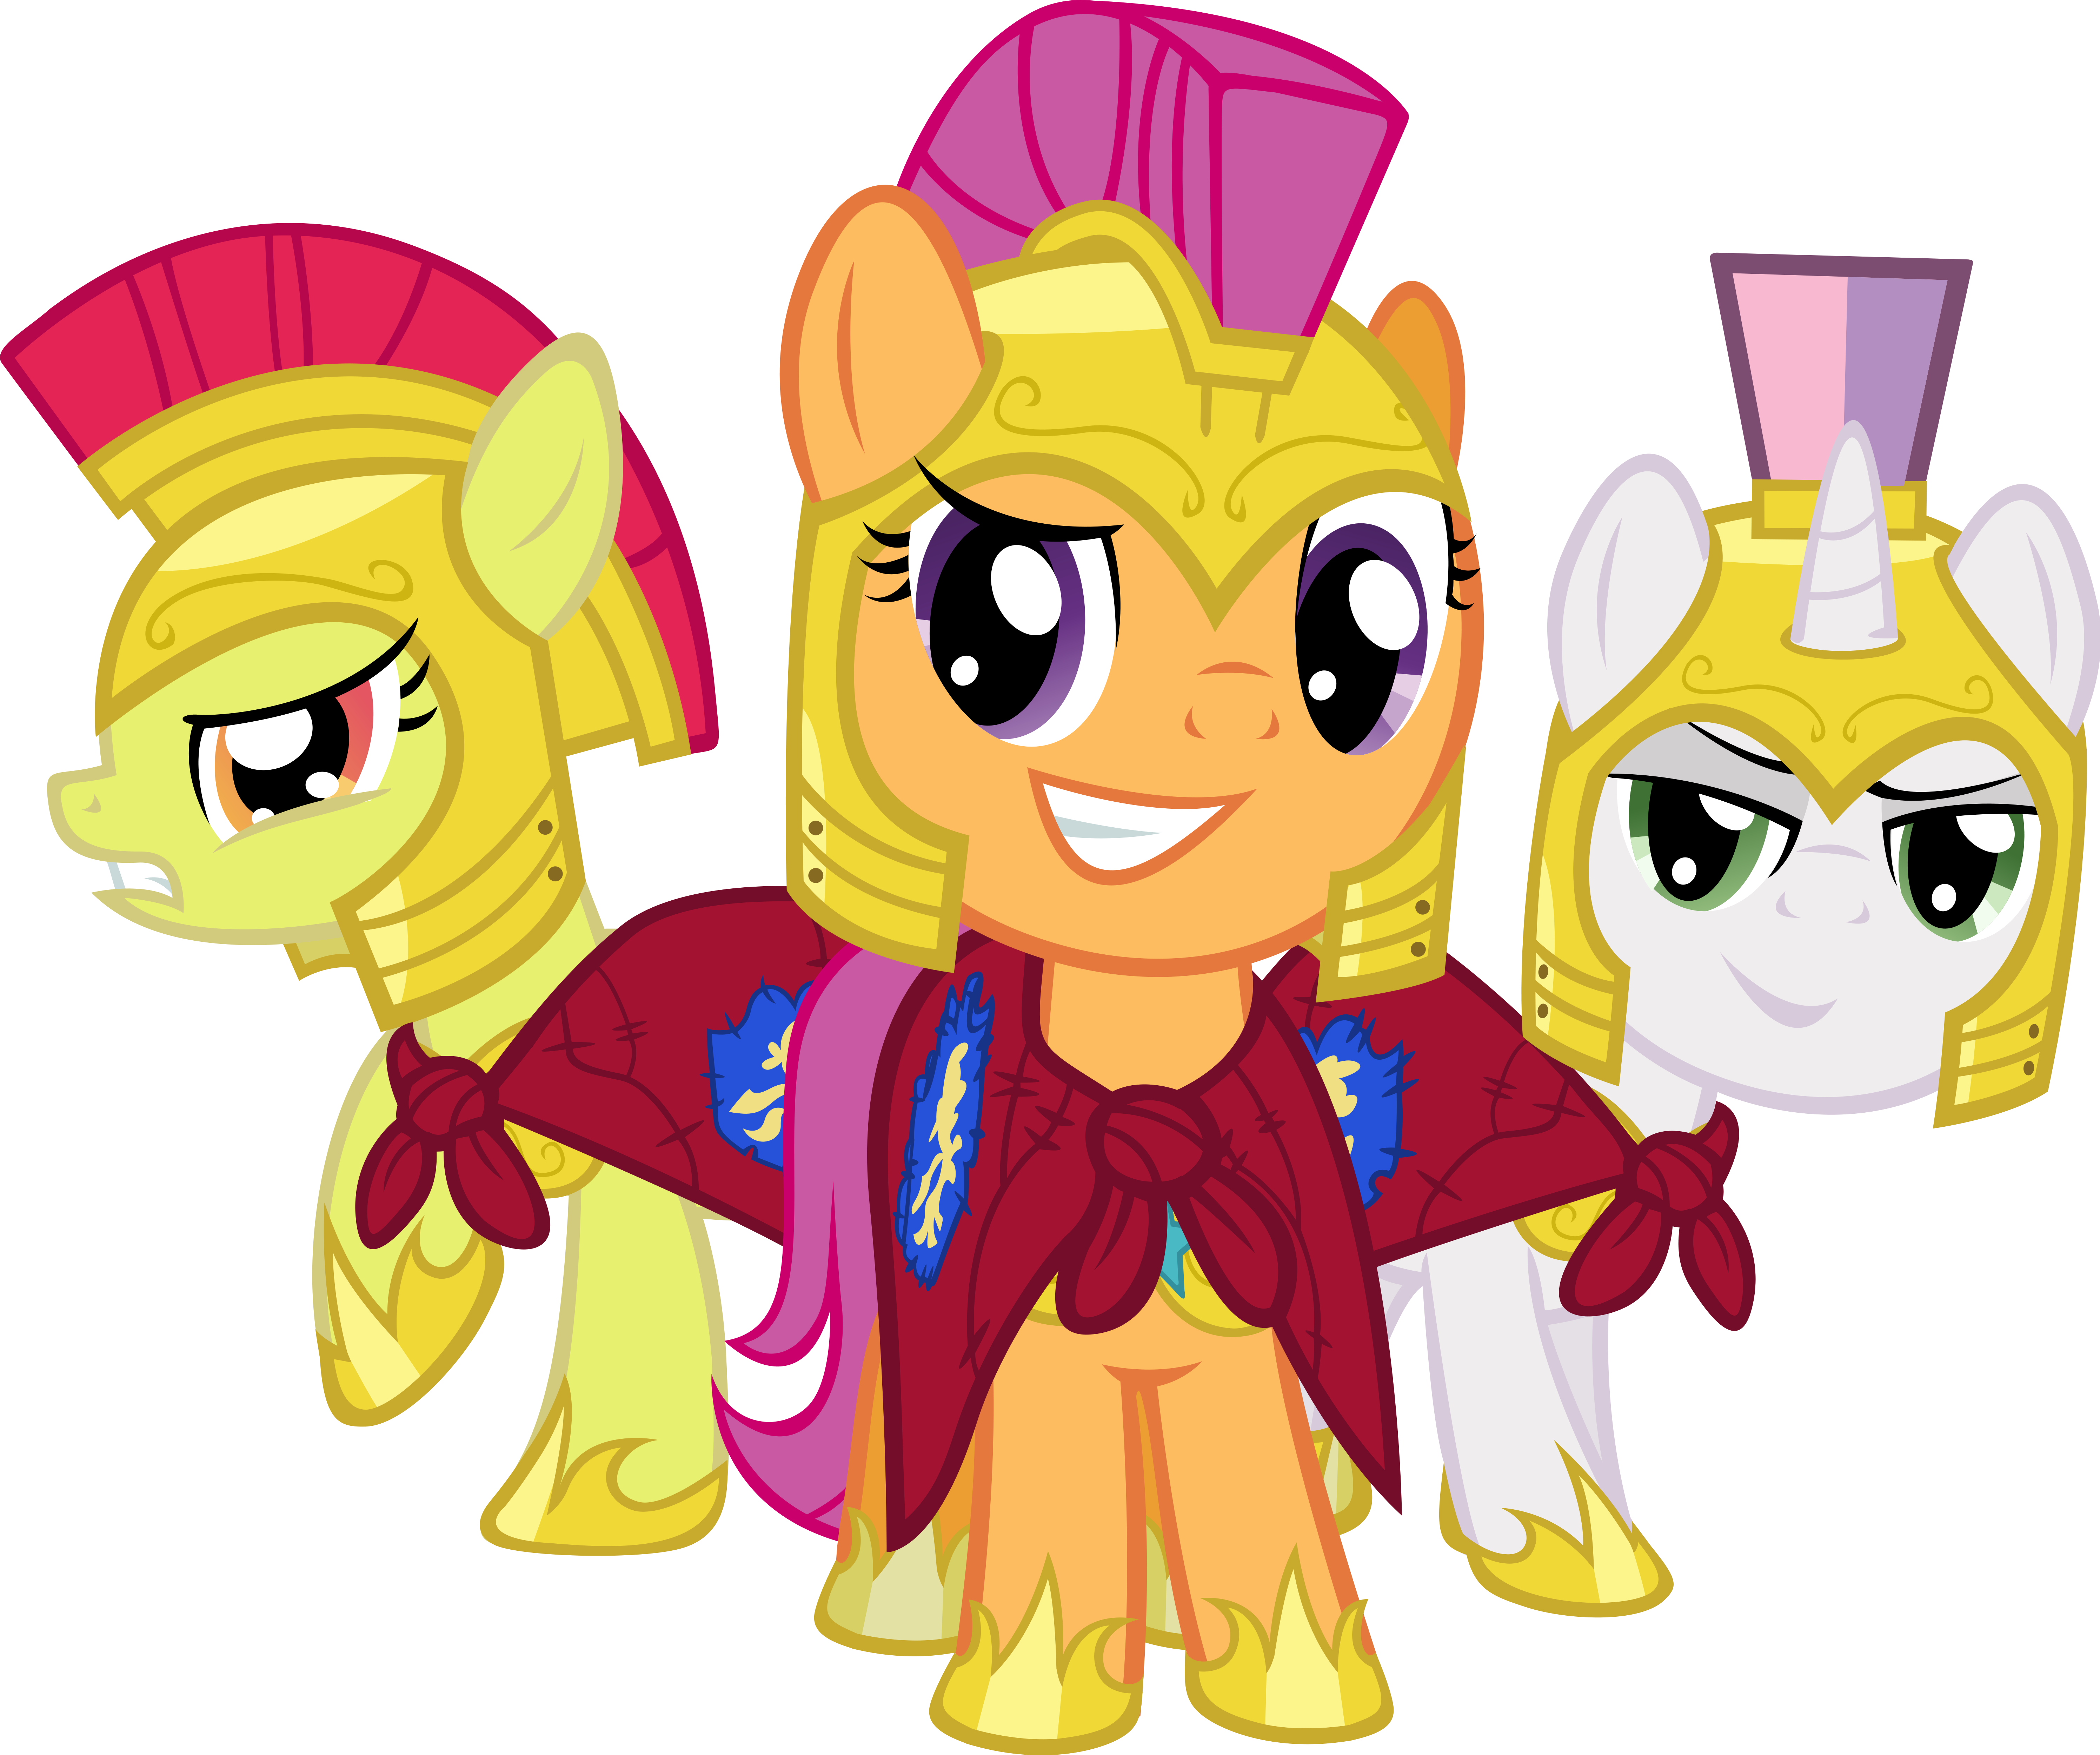 cutie_mark_crusader__royal_guards__by_spaceponies-d4mlodc.png